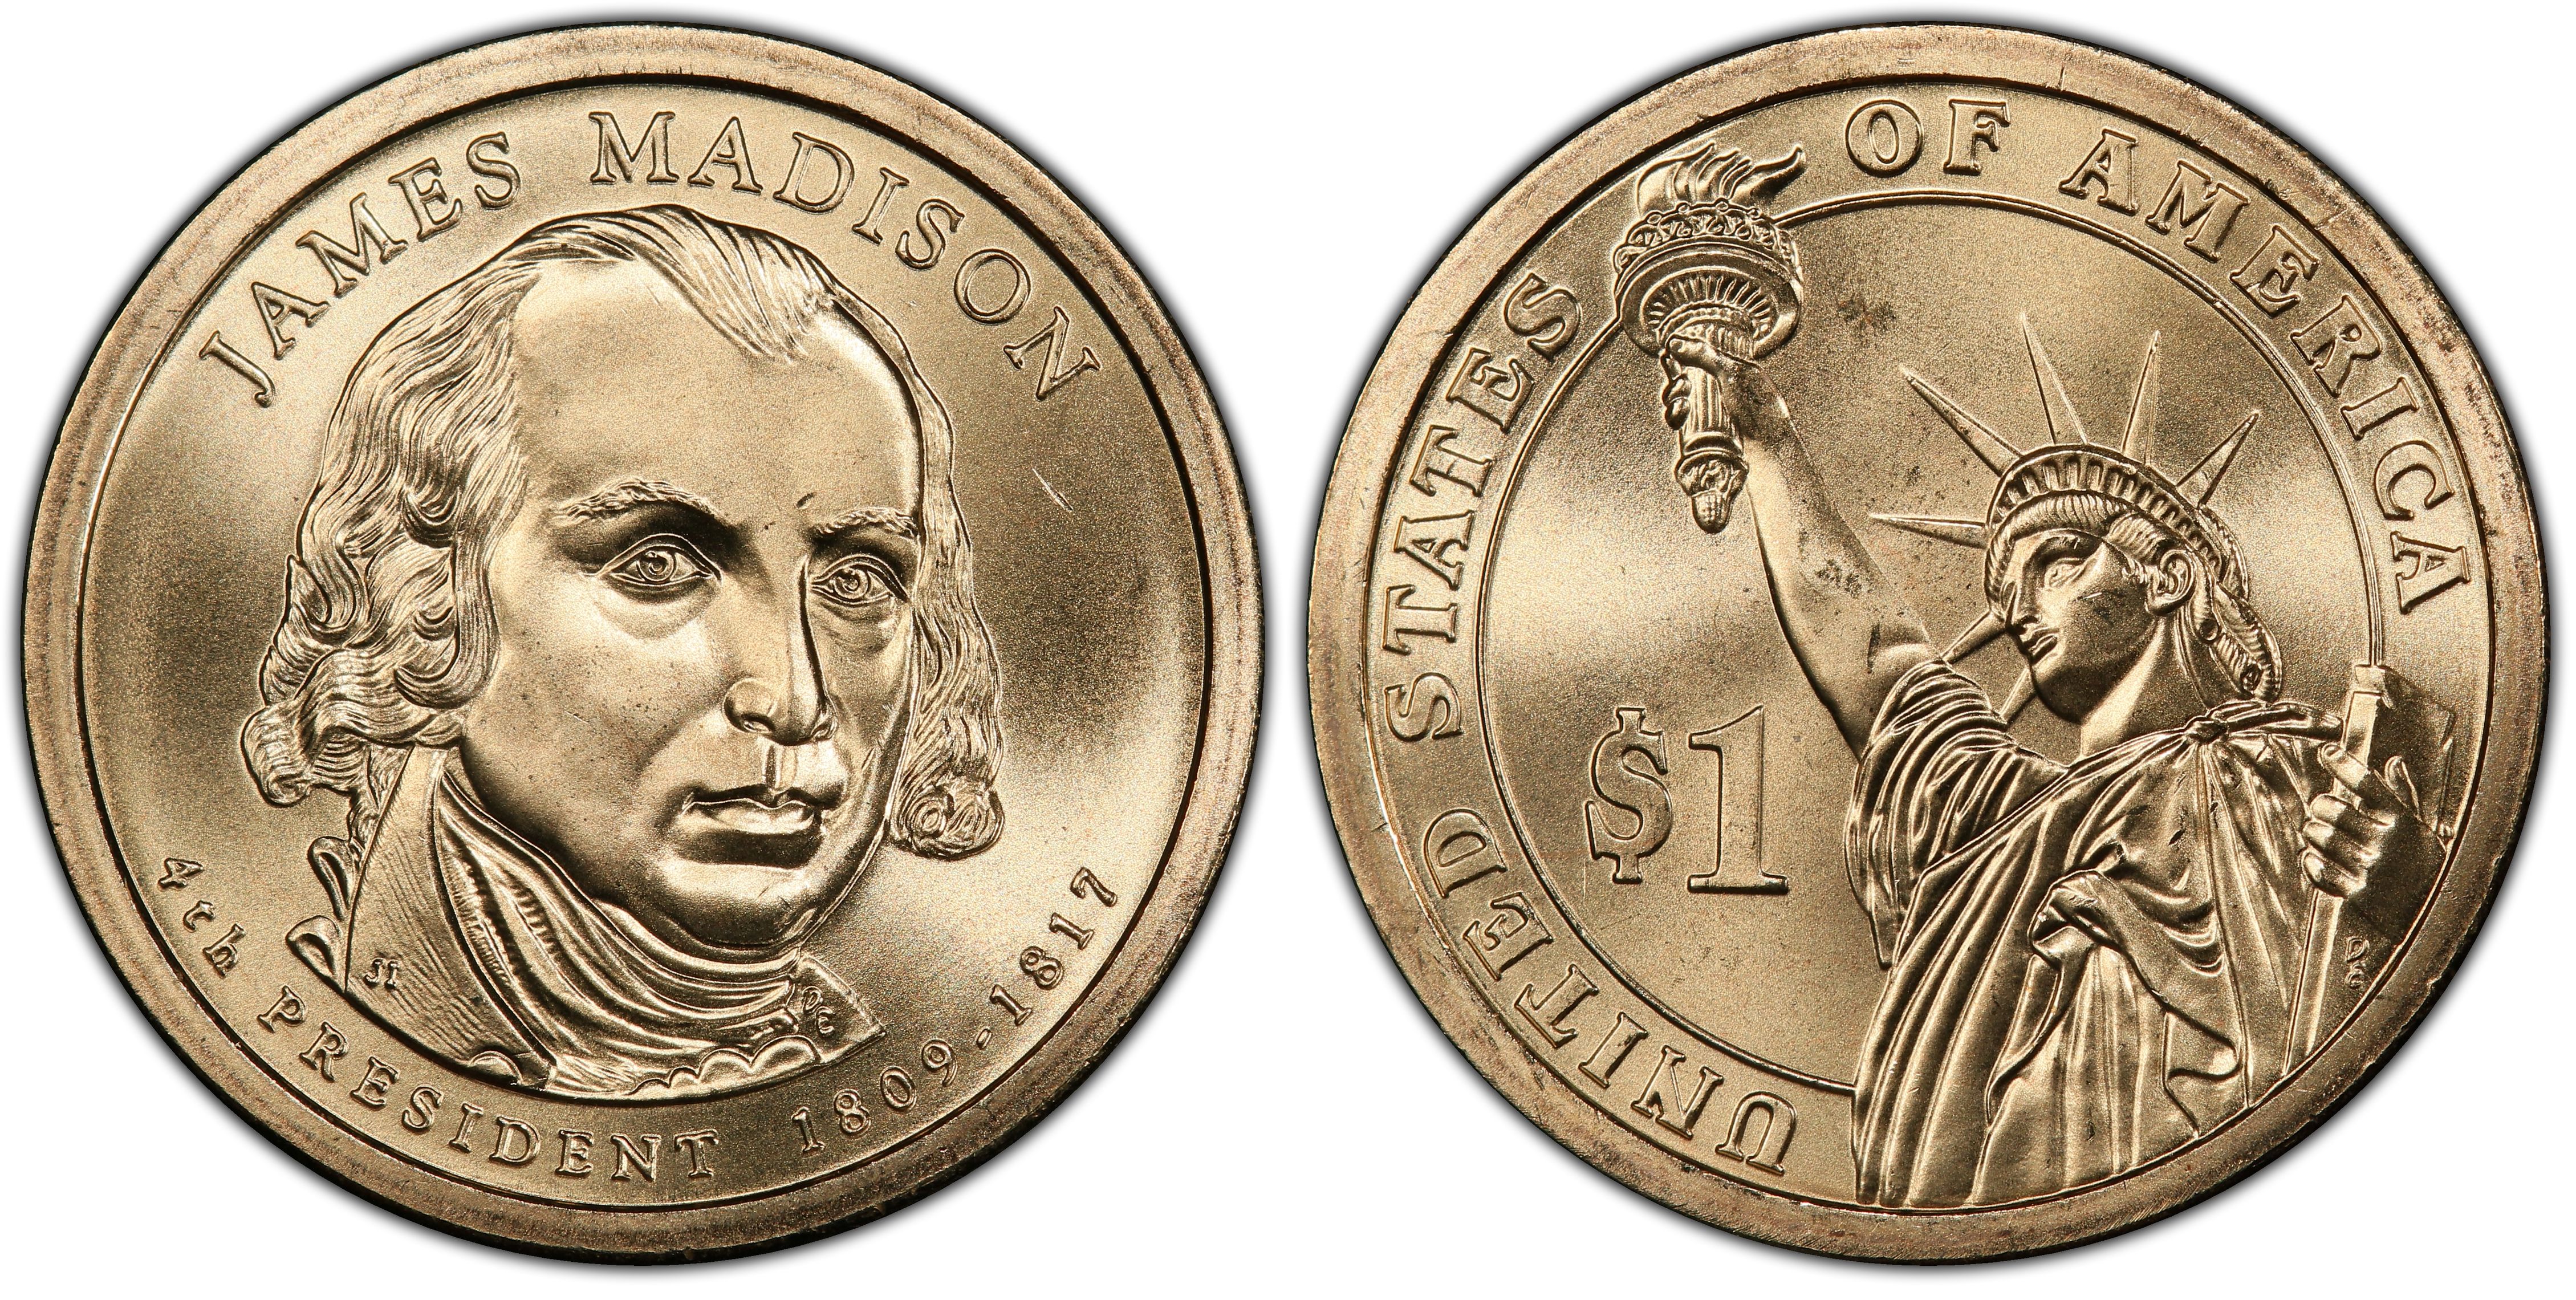 James Madison Dollar Coin for sale